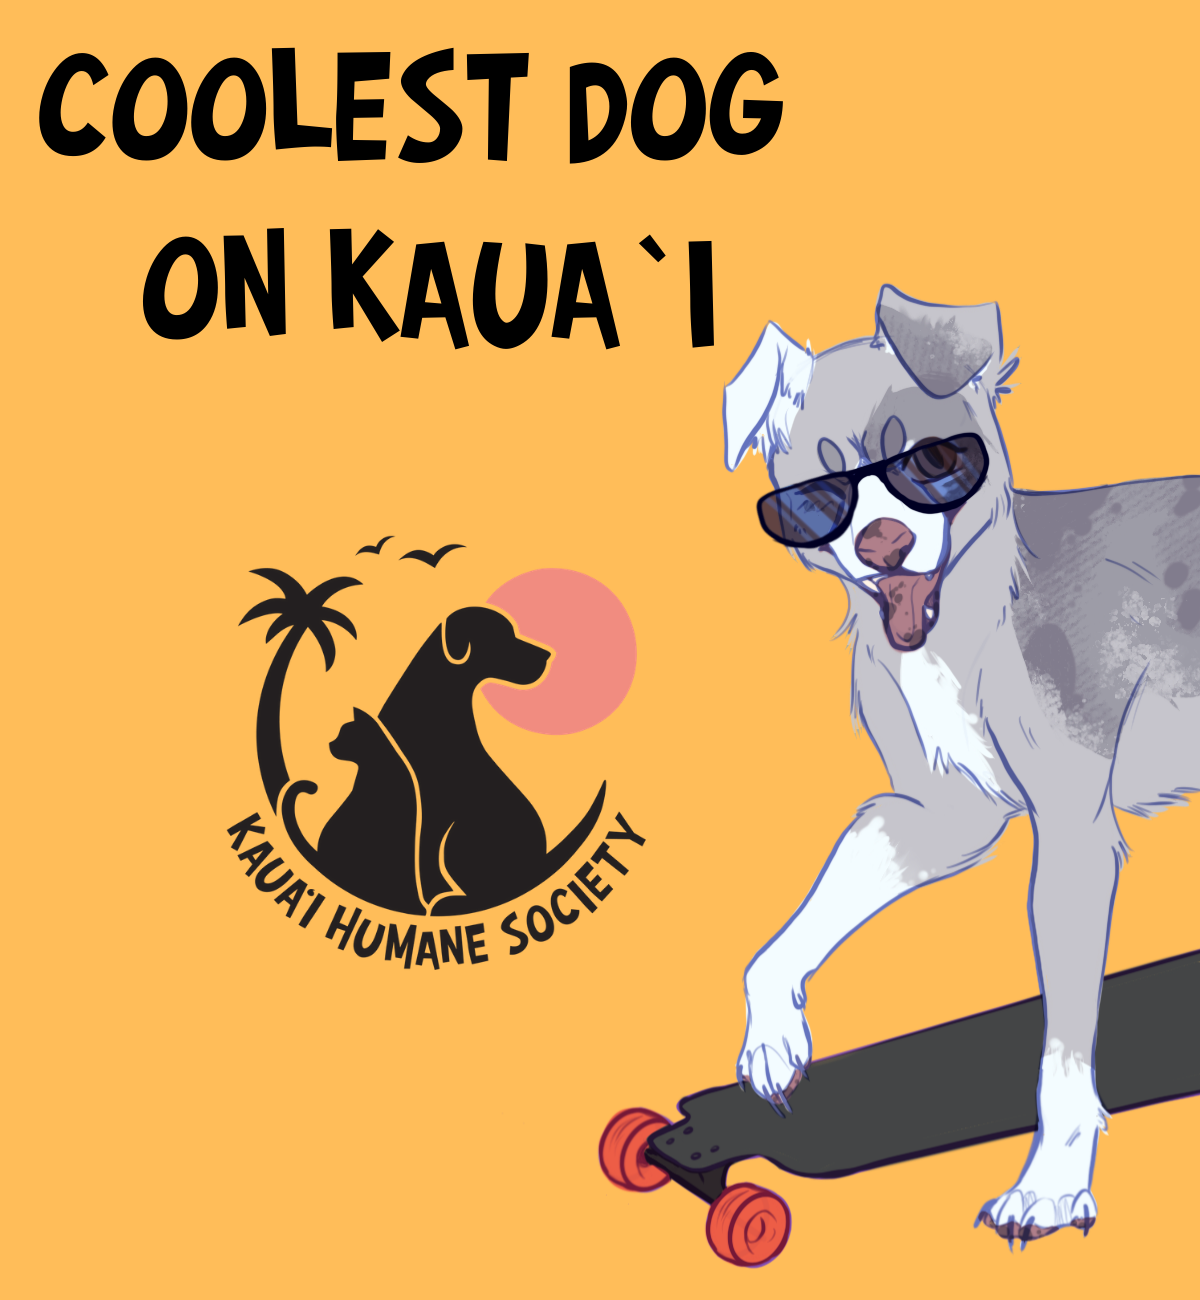 Join us at Jimmy's Grill for the coolest dog on Kaua`i event.